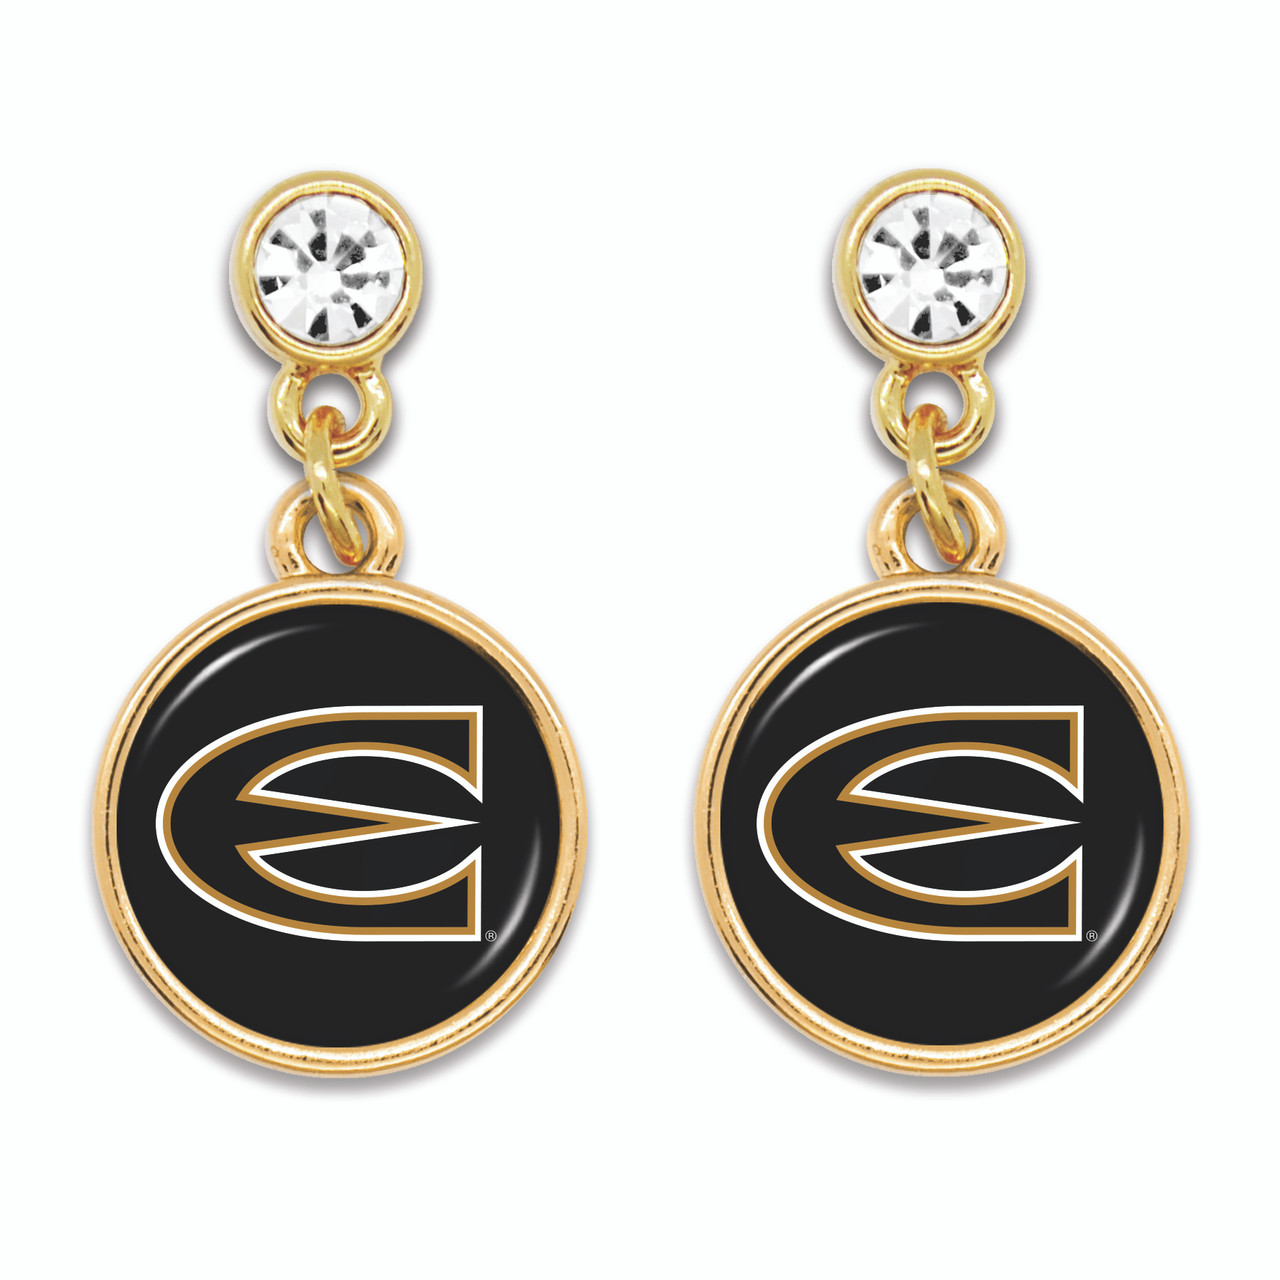 Emporia State Hornets - Gold Lydia Earrings